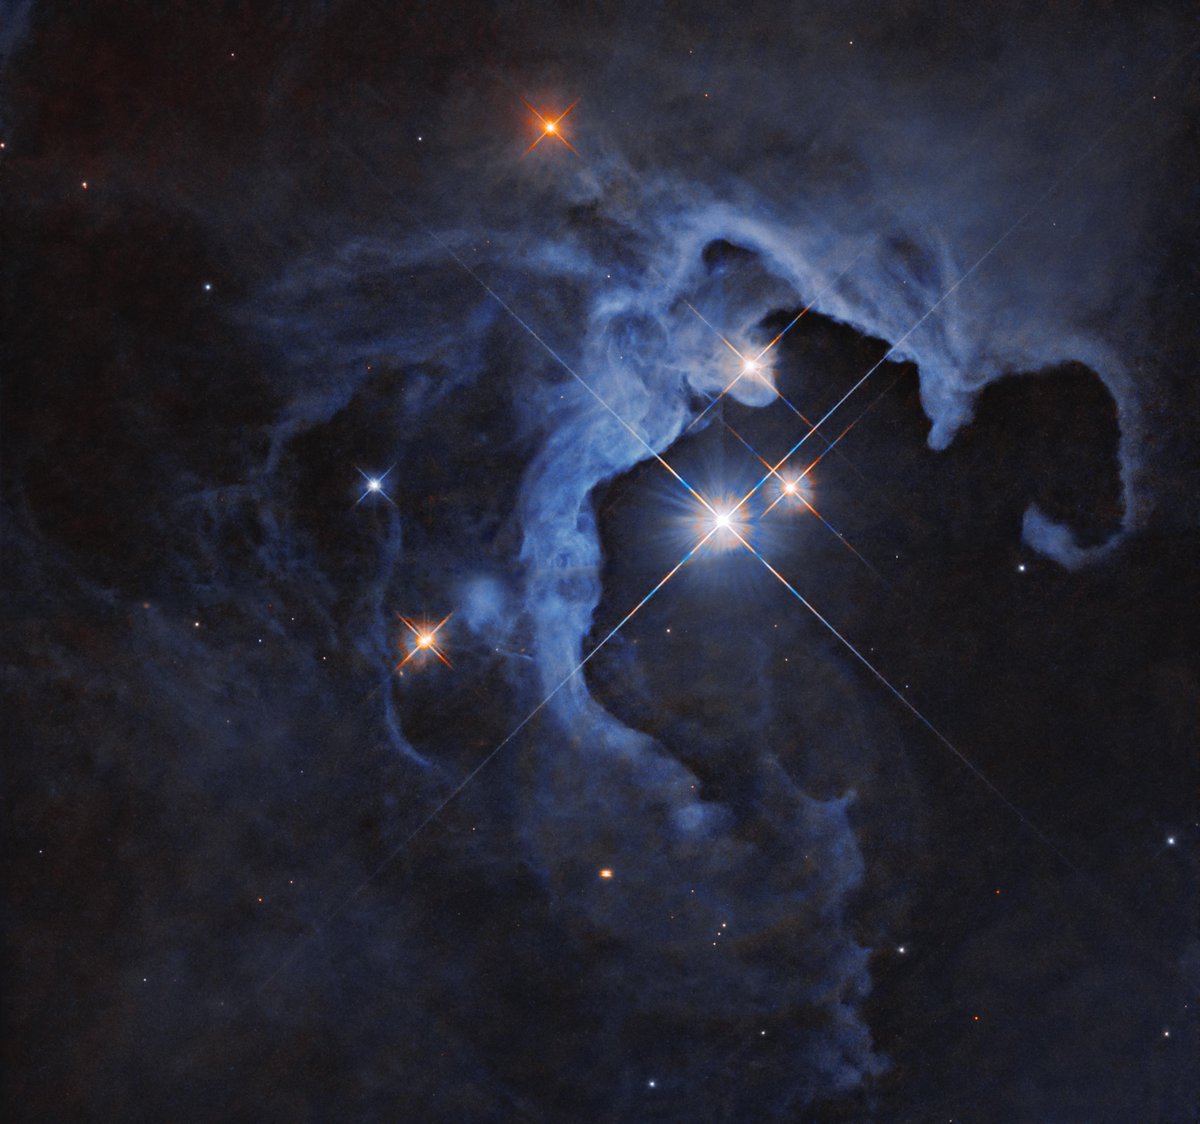 The new Hubble image depicts the triple-star system composed of the variable star HP Tau, HP Tau G2, and HP Tau G3. HP Tau is known as a T Tauri star, a type of young variable star that hasn’t begun nuclear fusion yet but is beginning to evolve into a hydrogen-fueled star similar